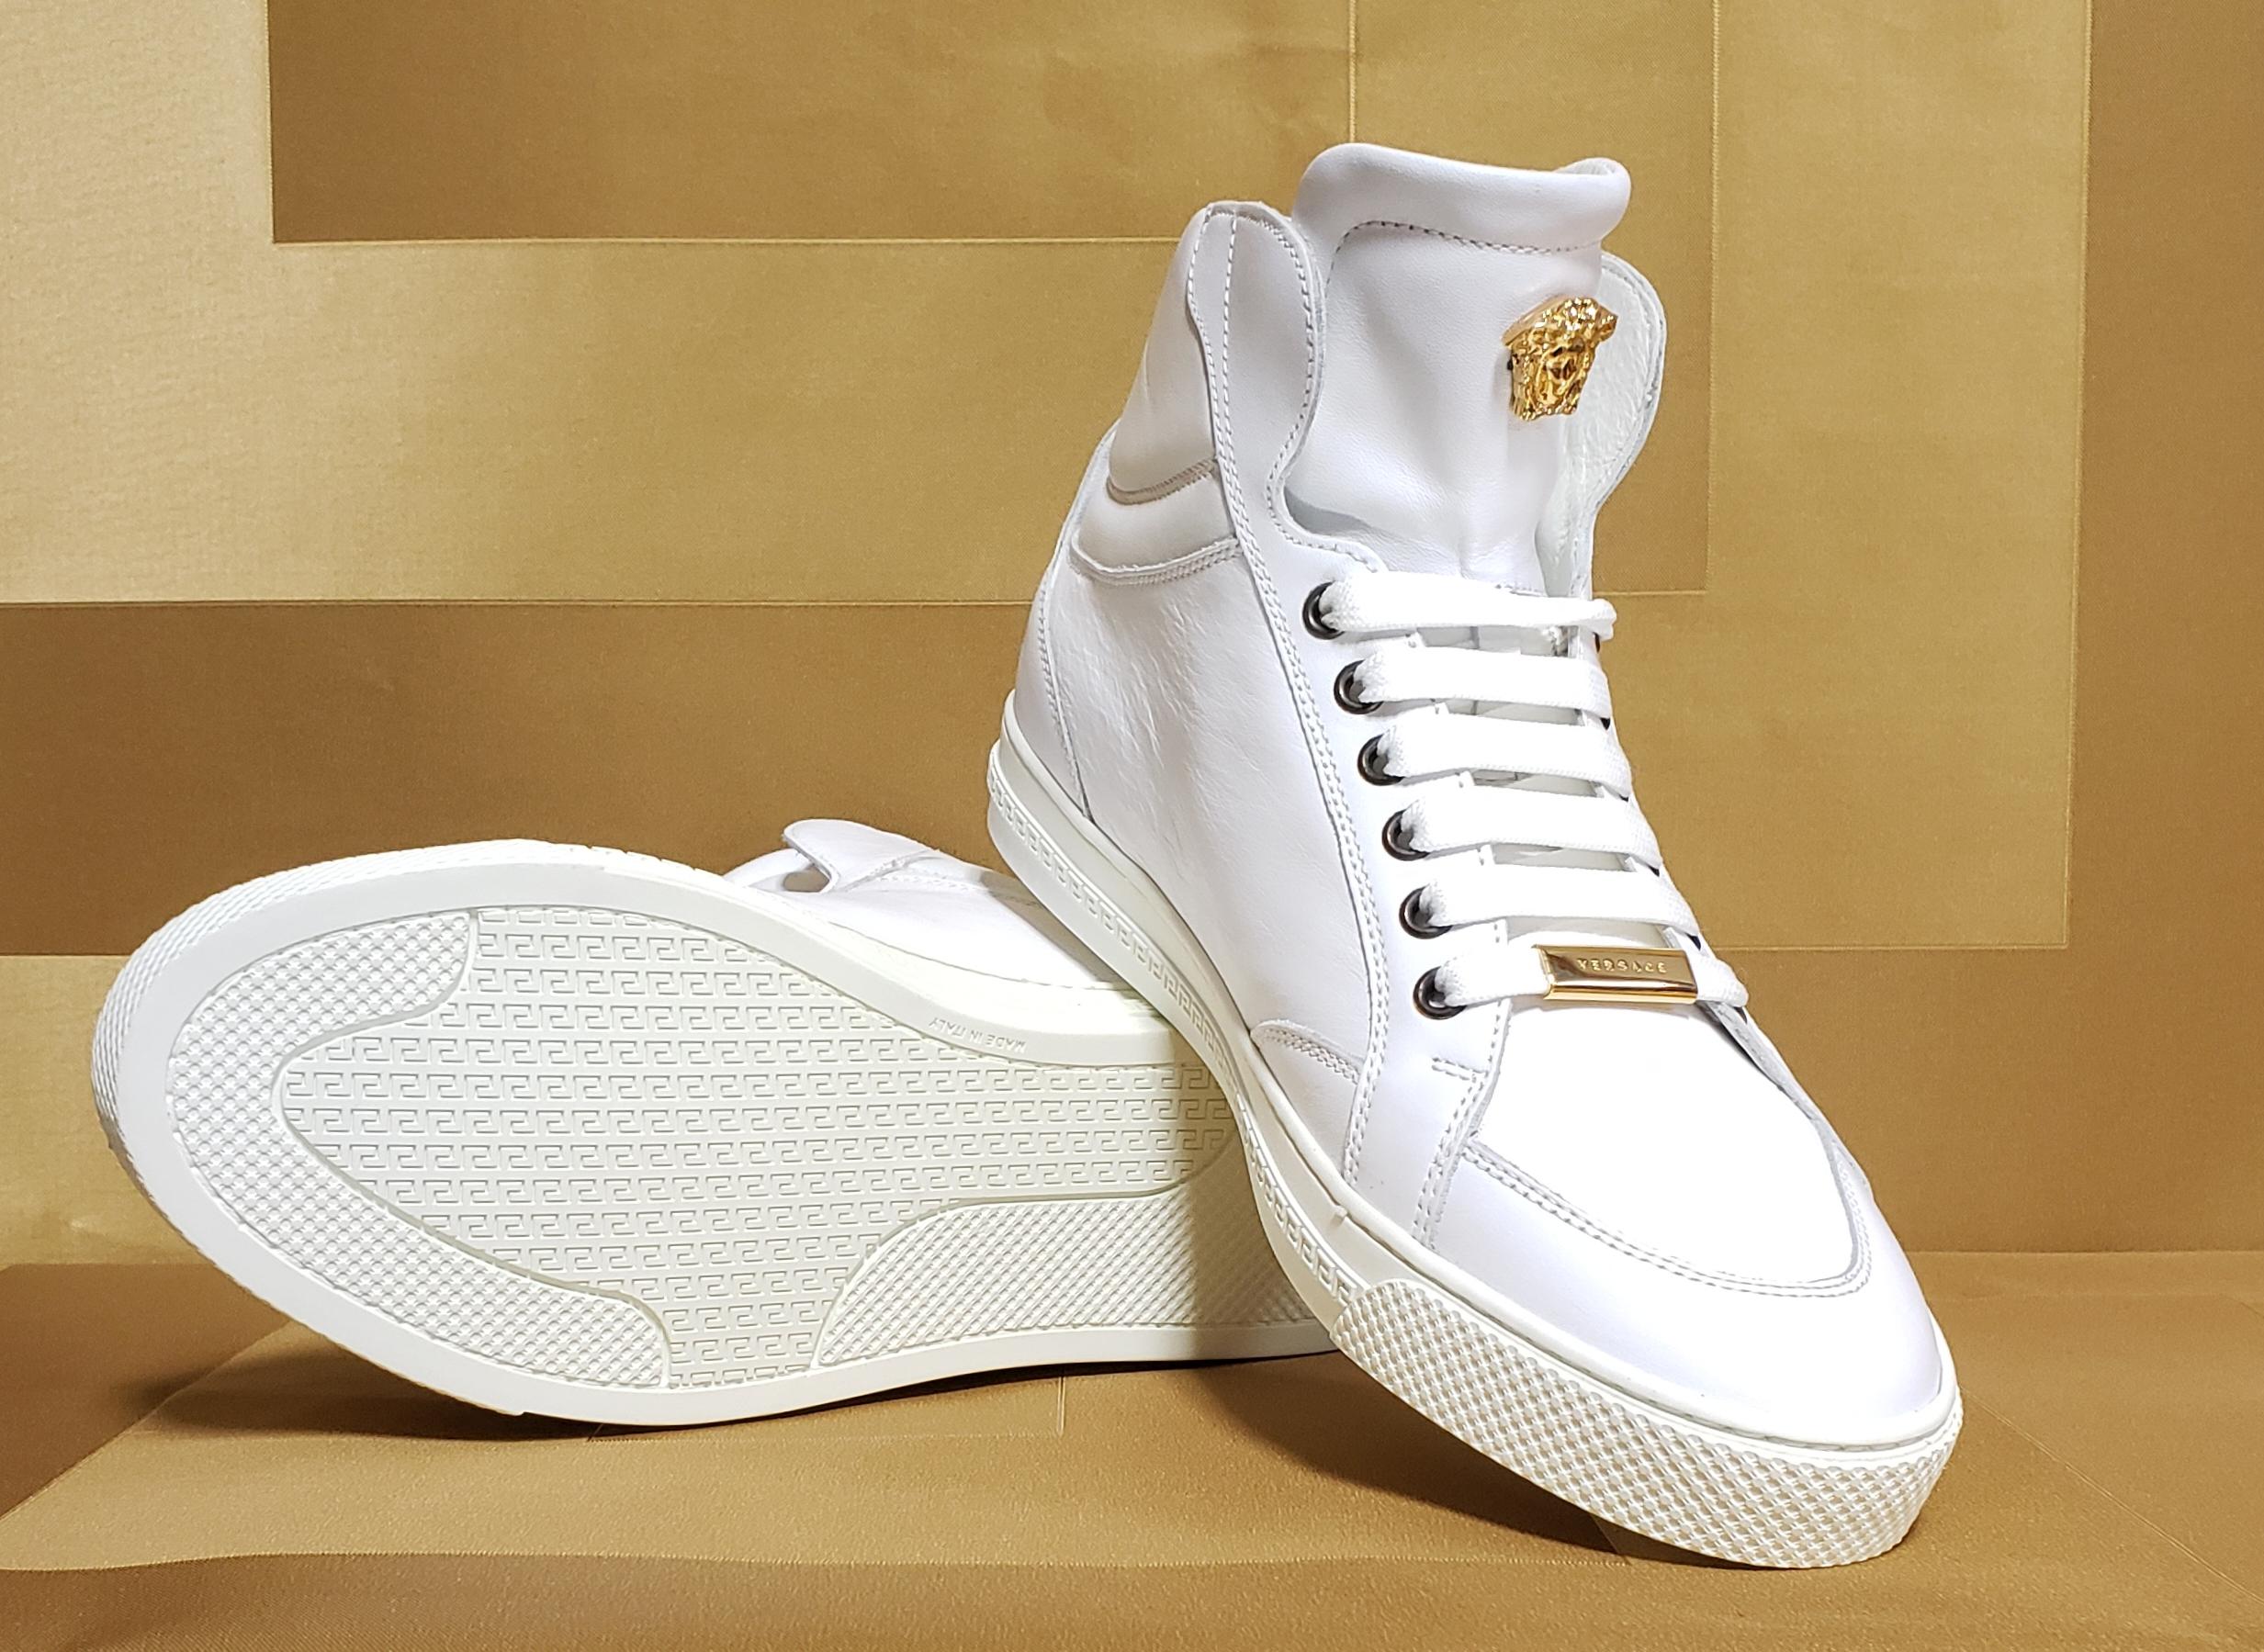 VERSACE

White Sneakers

White  leather, pin detail

EMBROIDERED GOLD MEDUSA

Leather lining
Rubber sole

Italian size is 39.5 - US 6.5

Comes with Versace box and authenticity card.

 100% authentic guarantee 

PLEASE VISIT OUR STORE FOR MORE GREAT